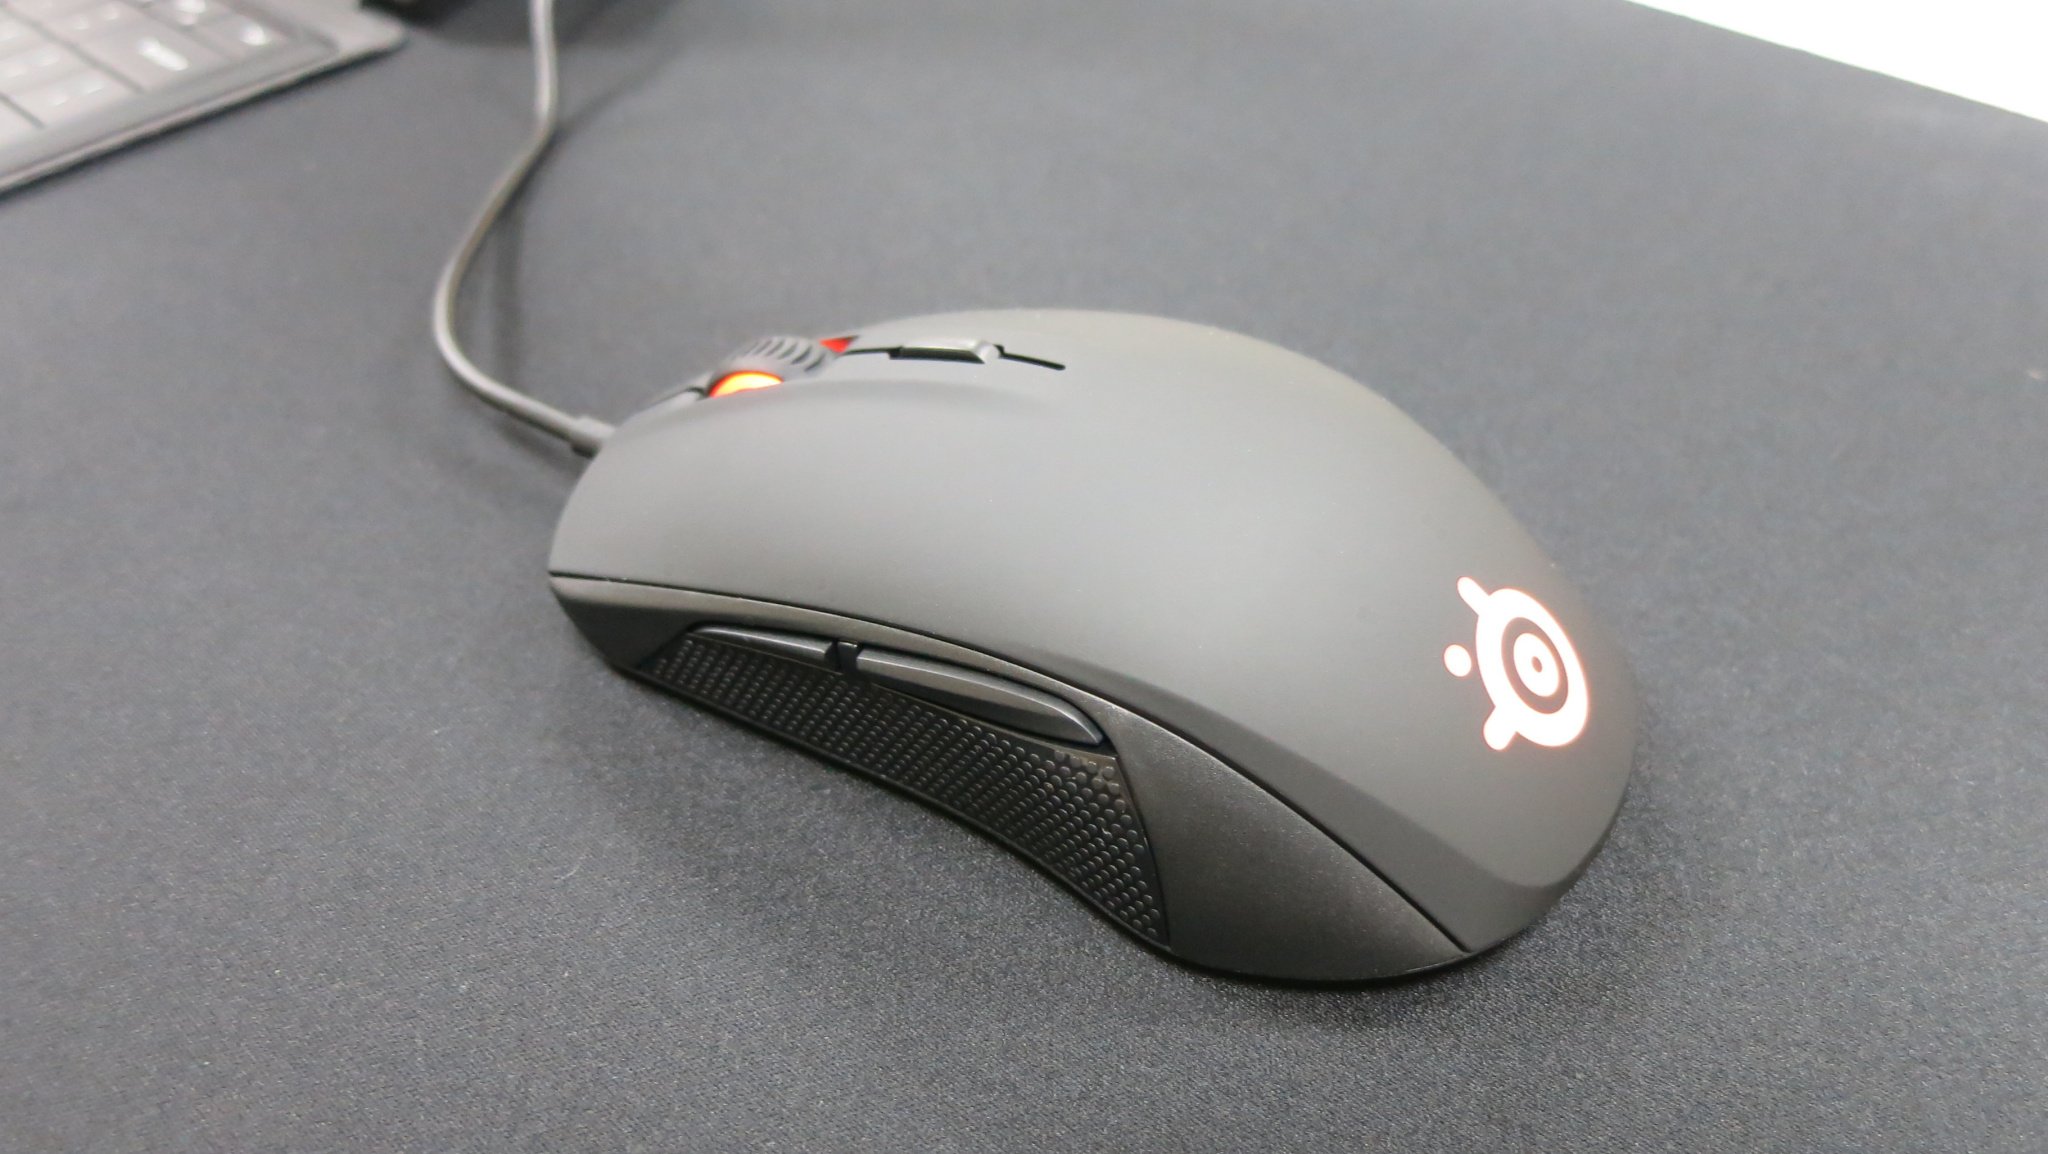 SteelSeries-Rival-100-Gaming-Mouse-main.jpg